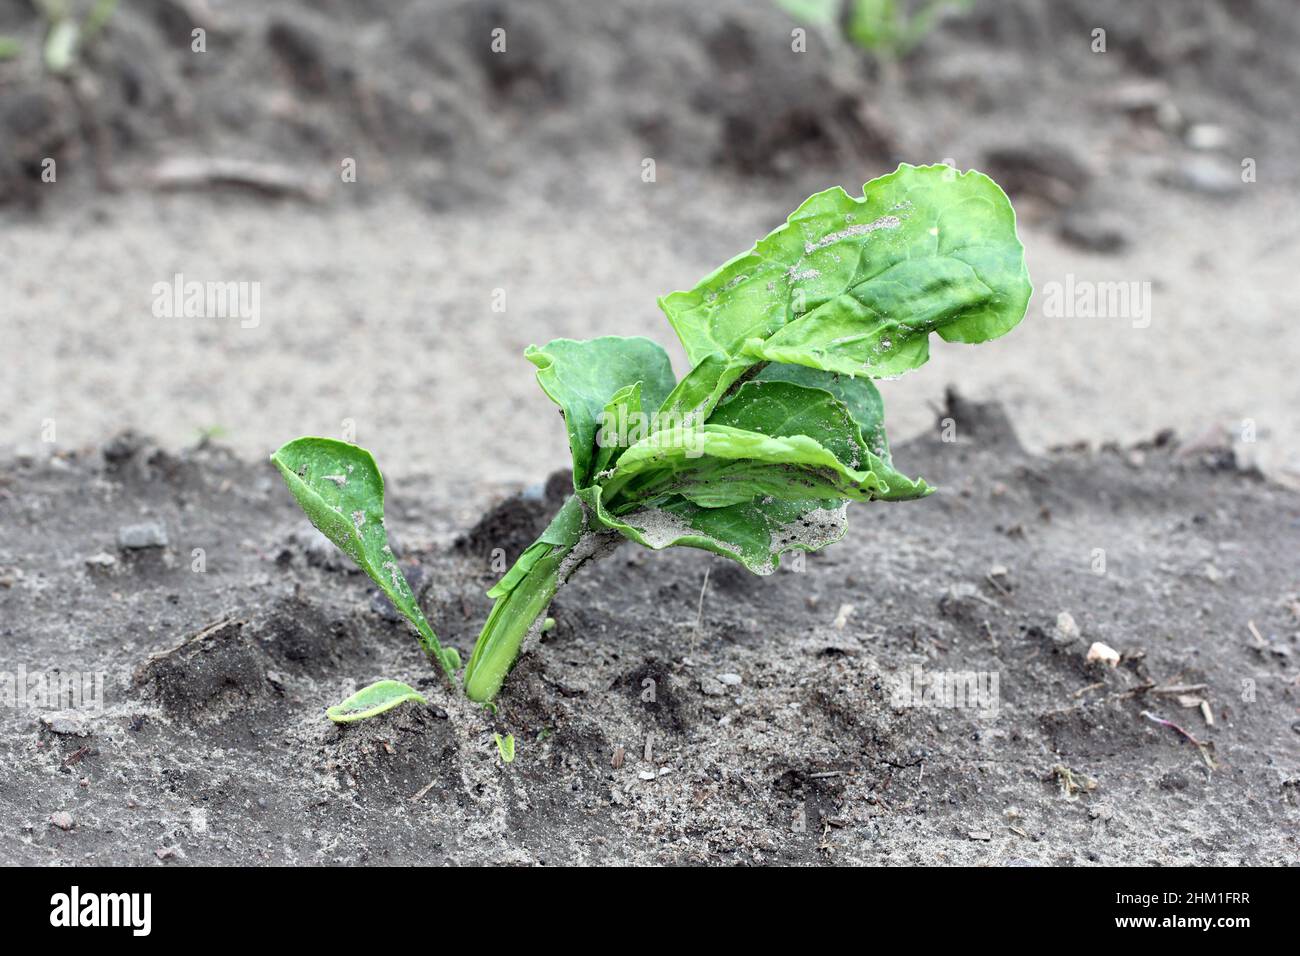 Beet plant damaged by crop protection products - phytotoxicity, deformed plants. Stock Photo